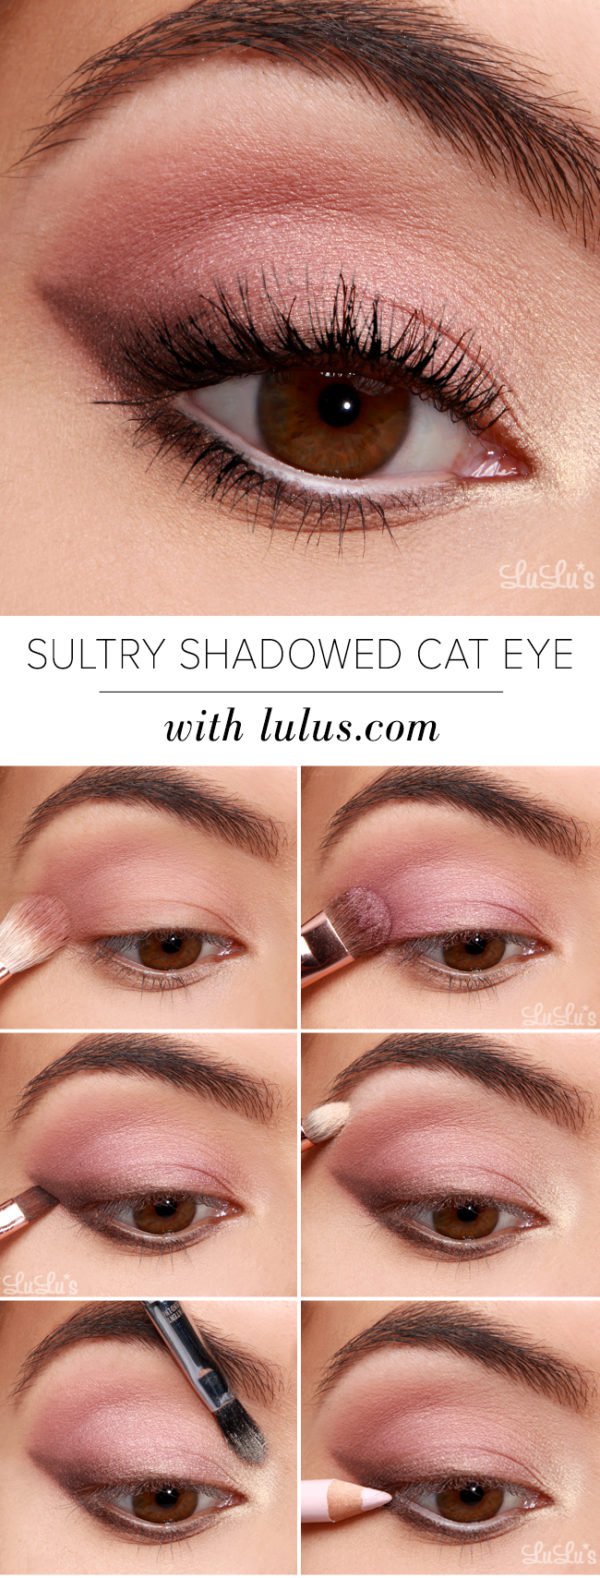 sultry-shadowed-cat-eyes-